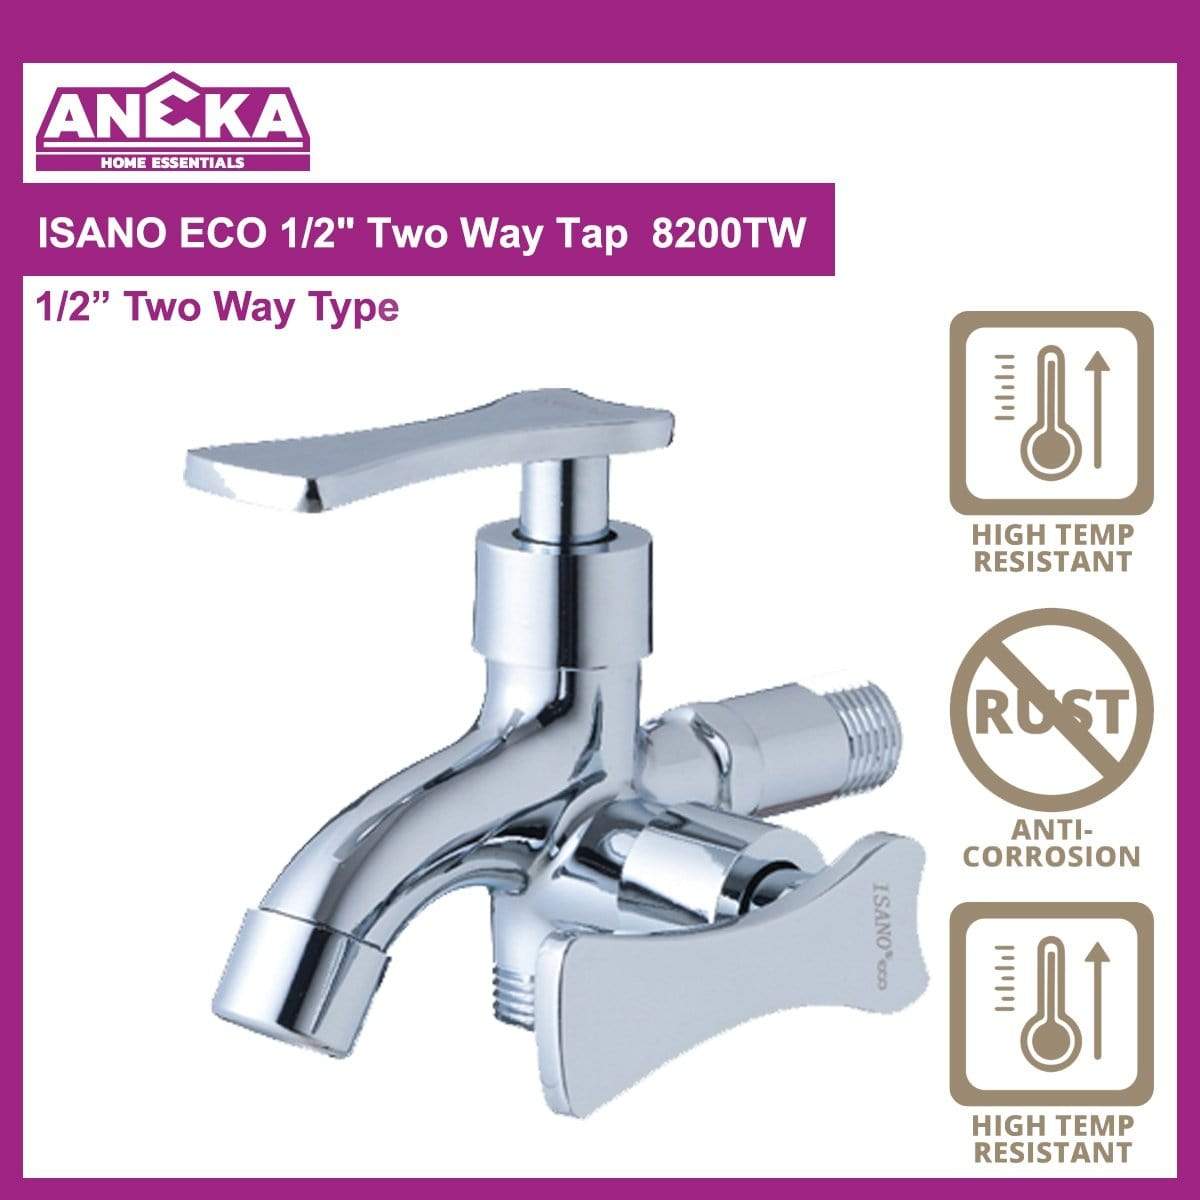 ISANO ECO 1/2" Two Way Tap 8200TW